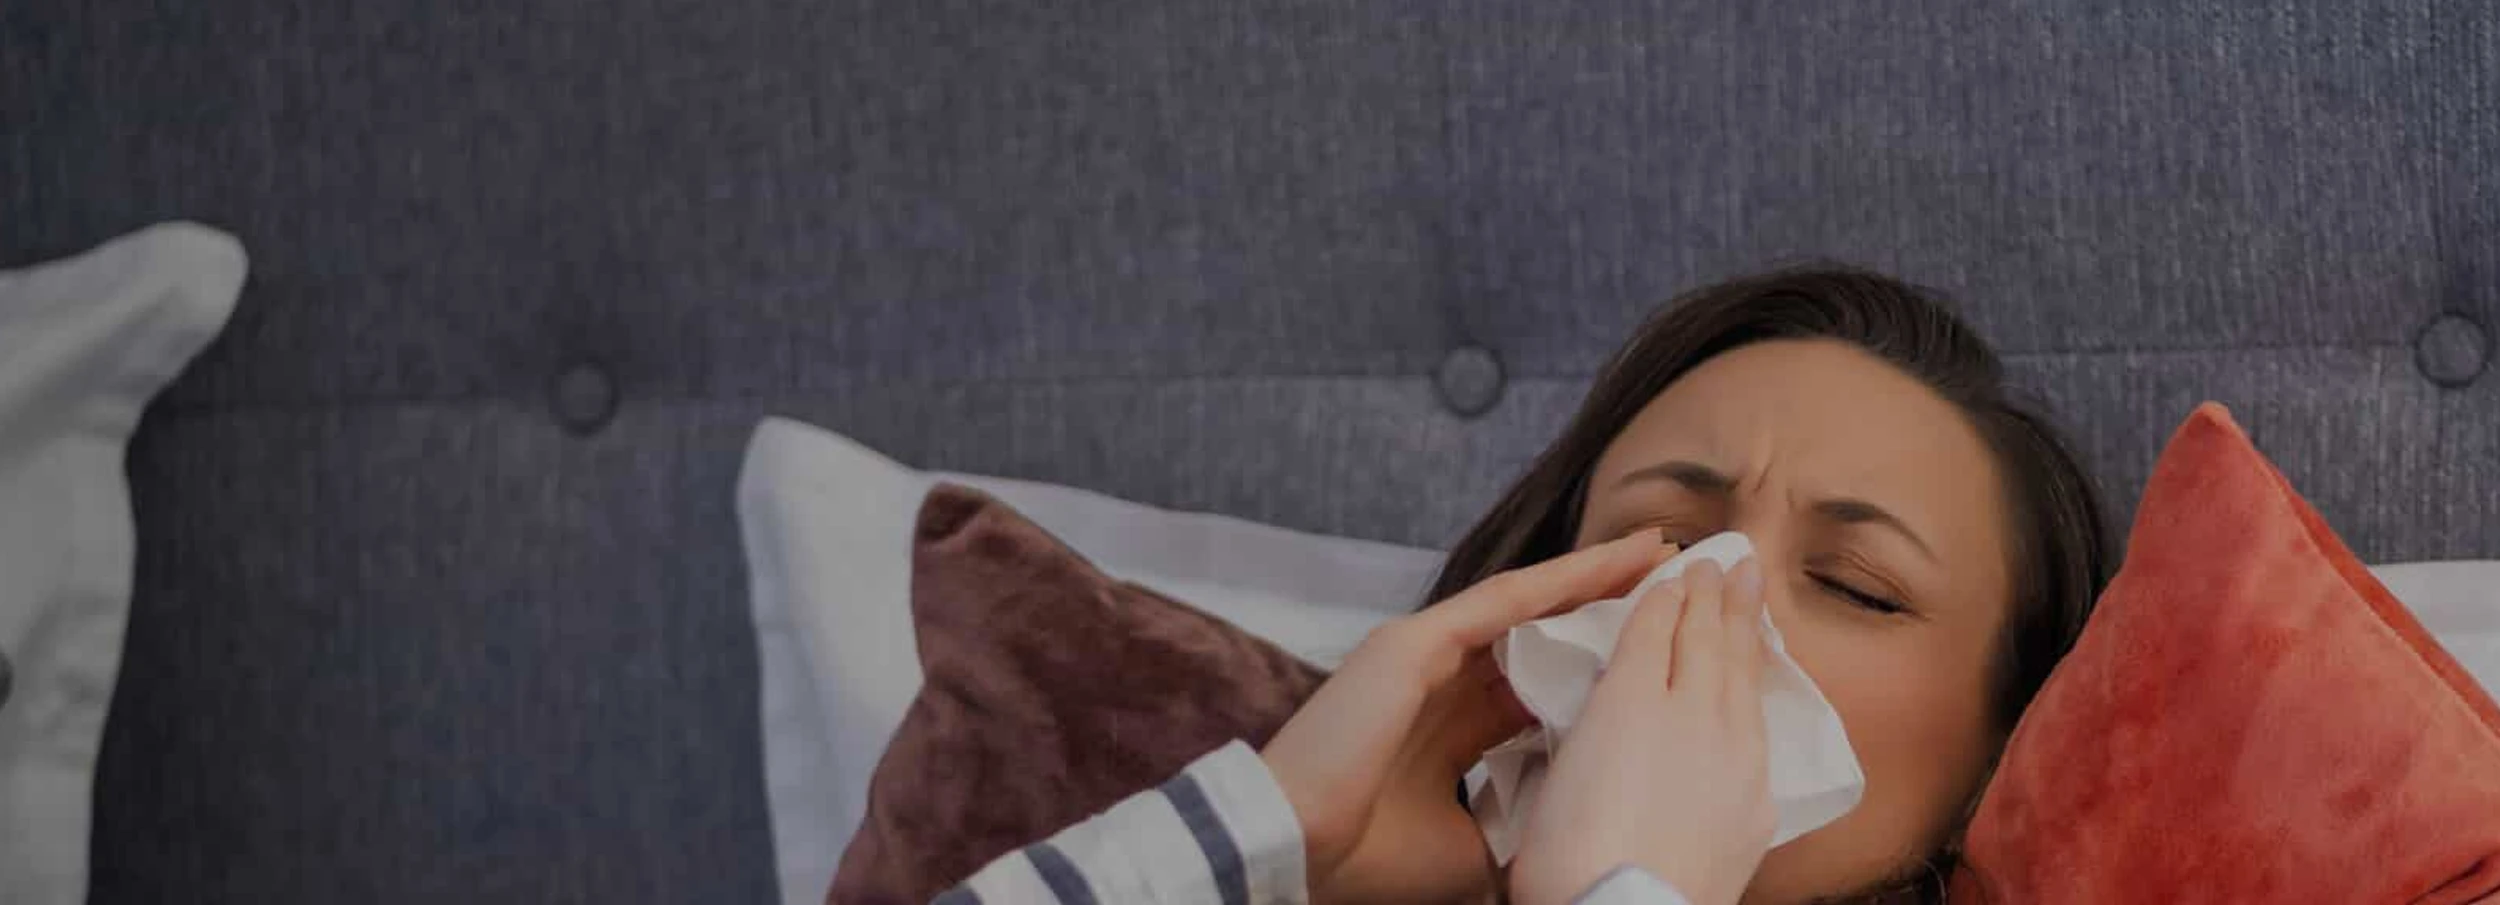 woman laying in bed sneezing into a kleenex.